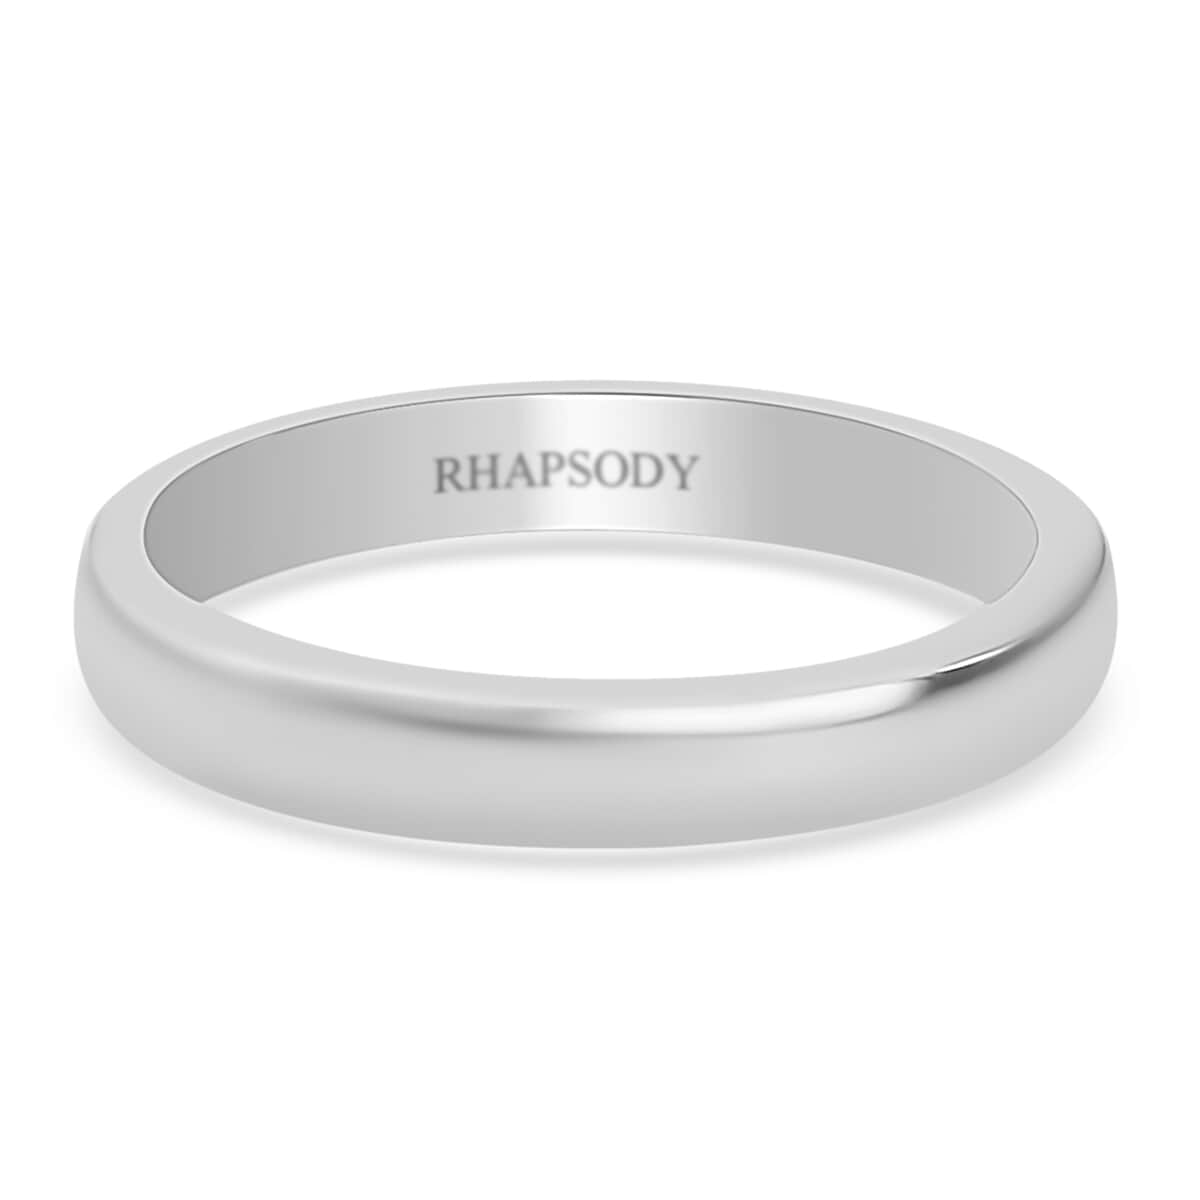 RHAPSODY Band Ring in 950 Platinum 5.75 Grams image number 4